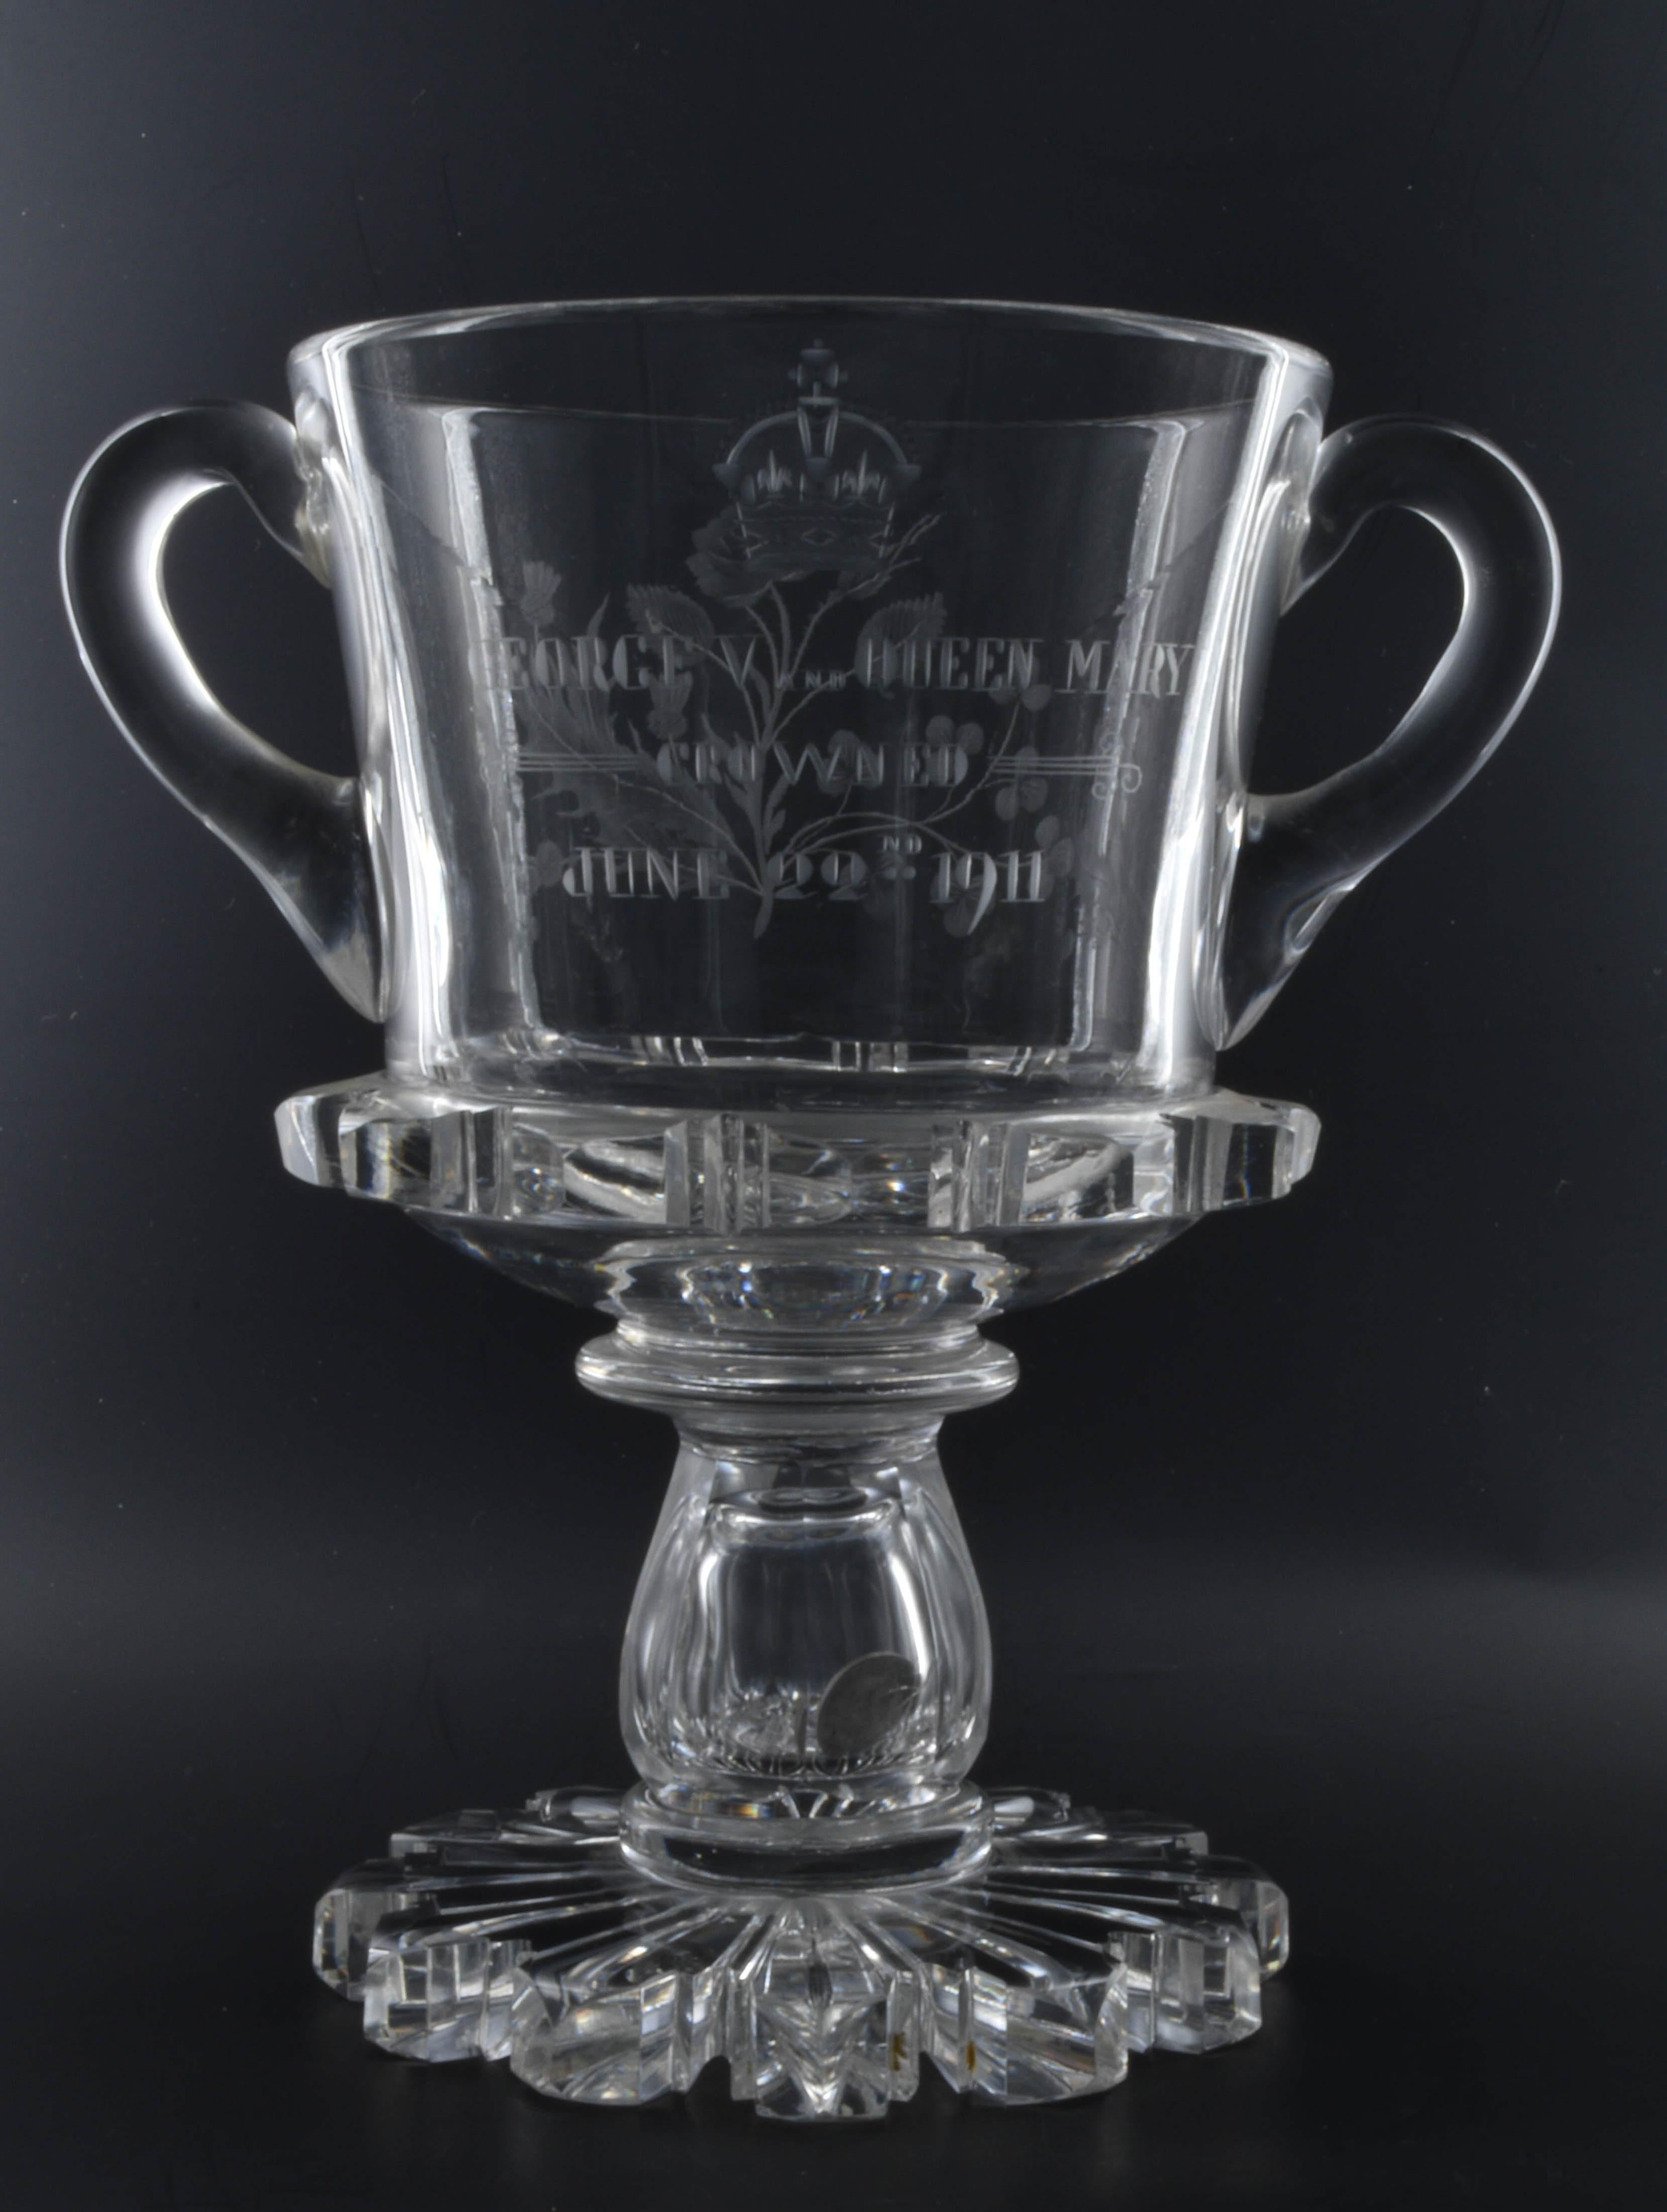 Lead crystal Loving cup, Coronation of George V and Queen Mary, June 22nd, 1911. 

Made for the retailer Thomas Goode. A traditional threepenny bit is set in the hollow stem, a nice indication of the skill of the glass-blower.


George V was born on